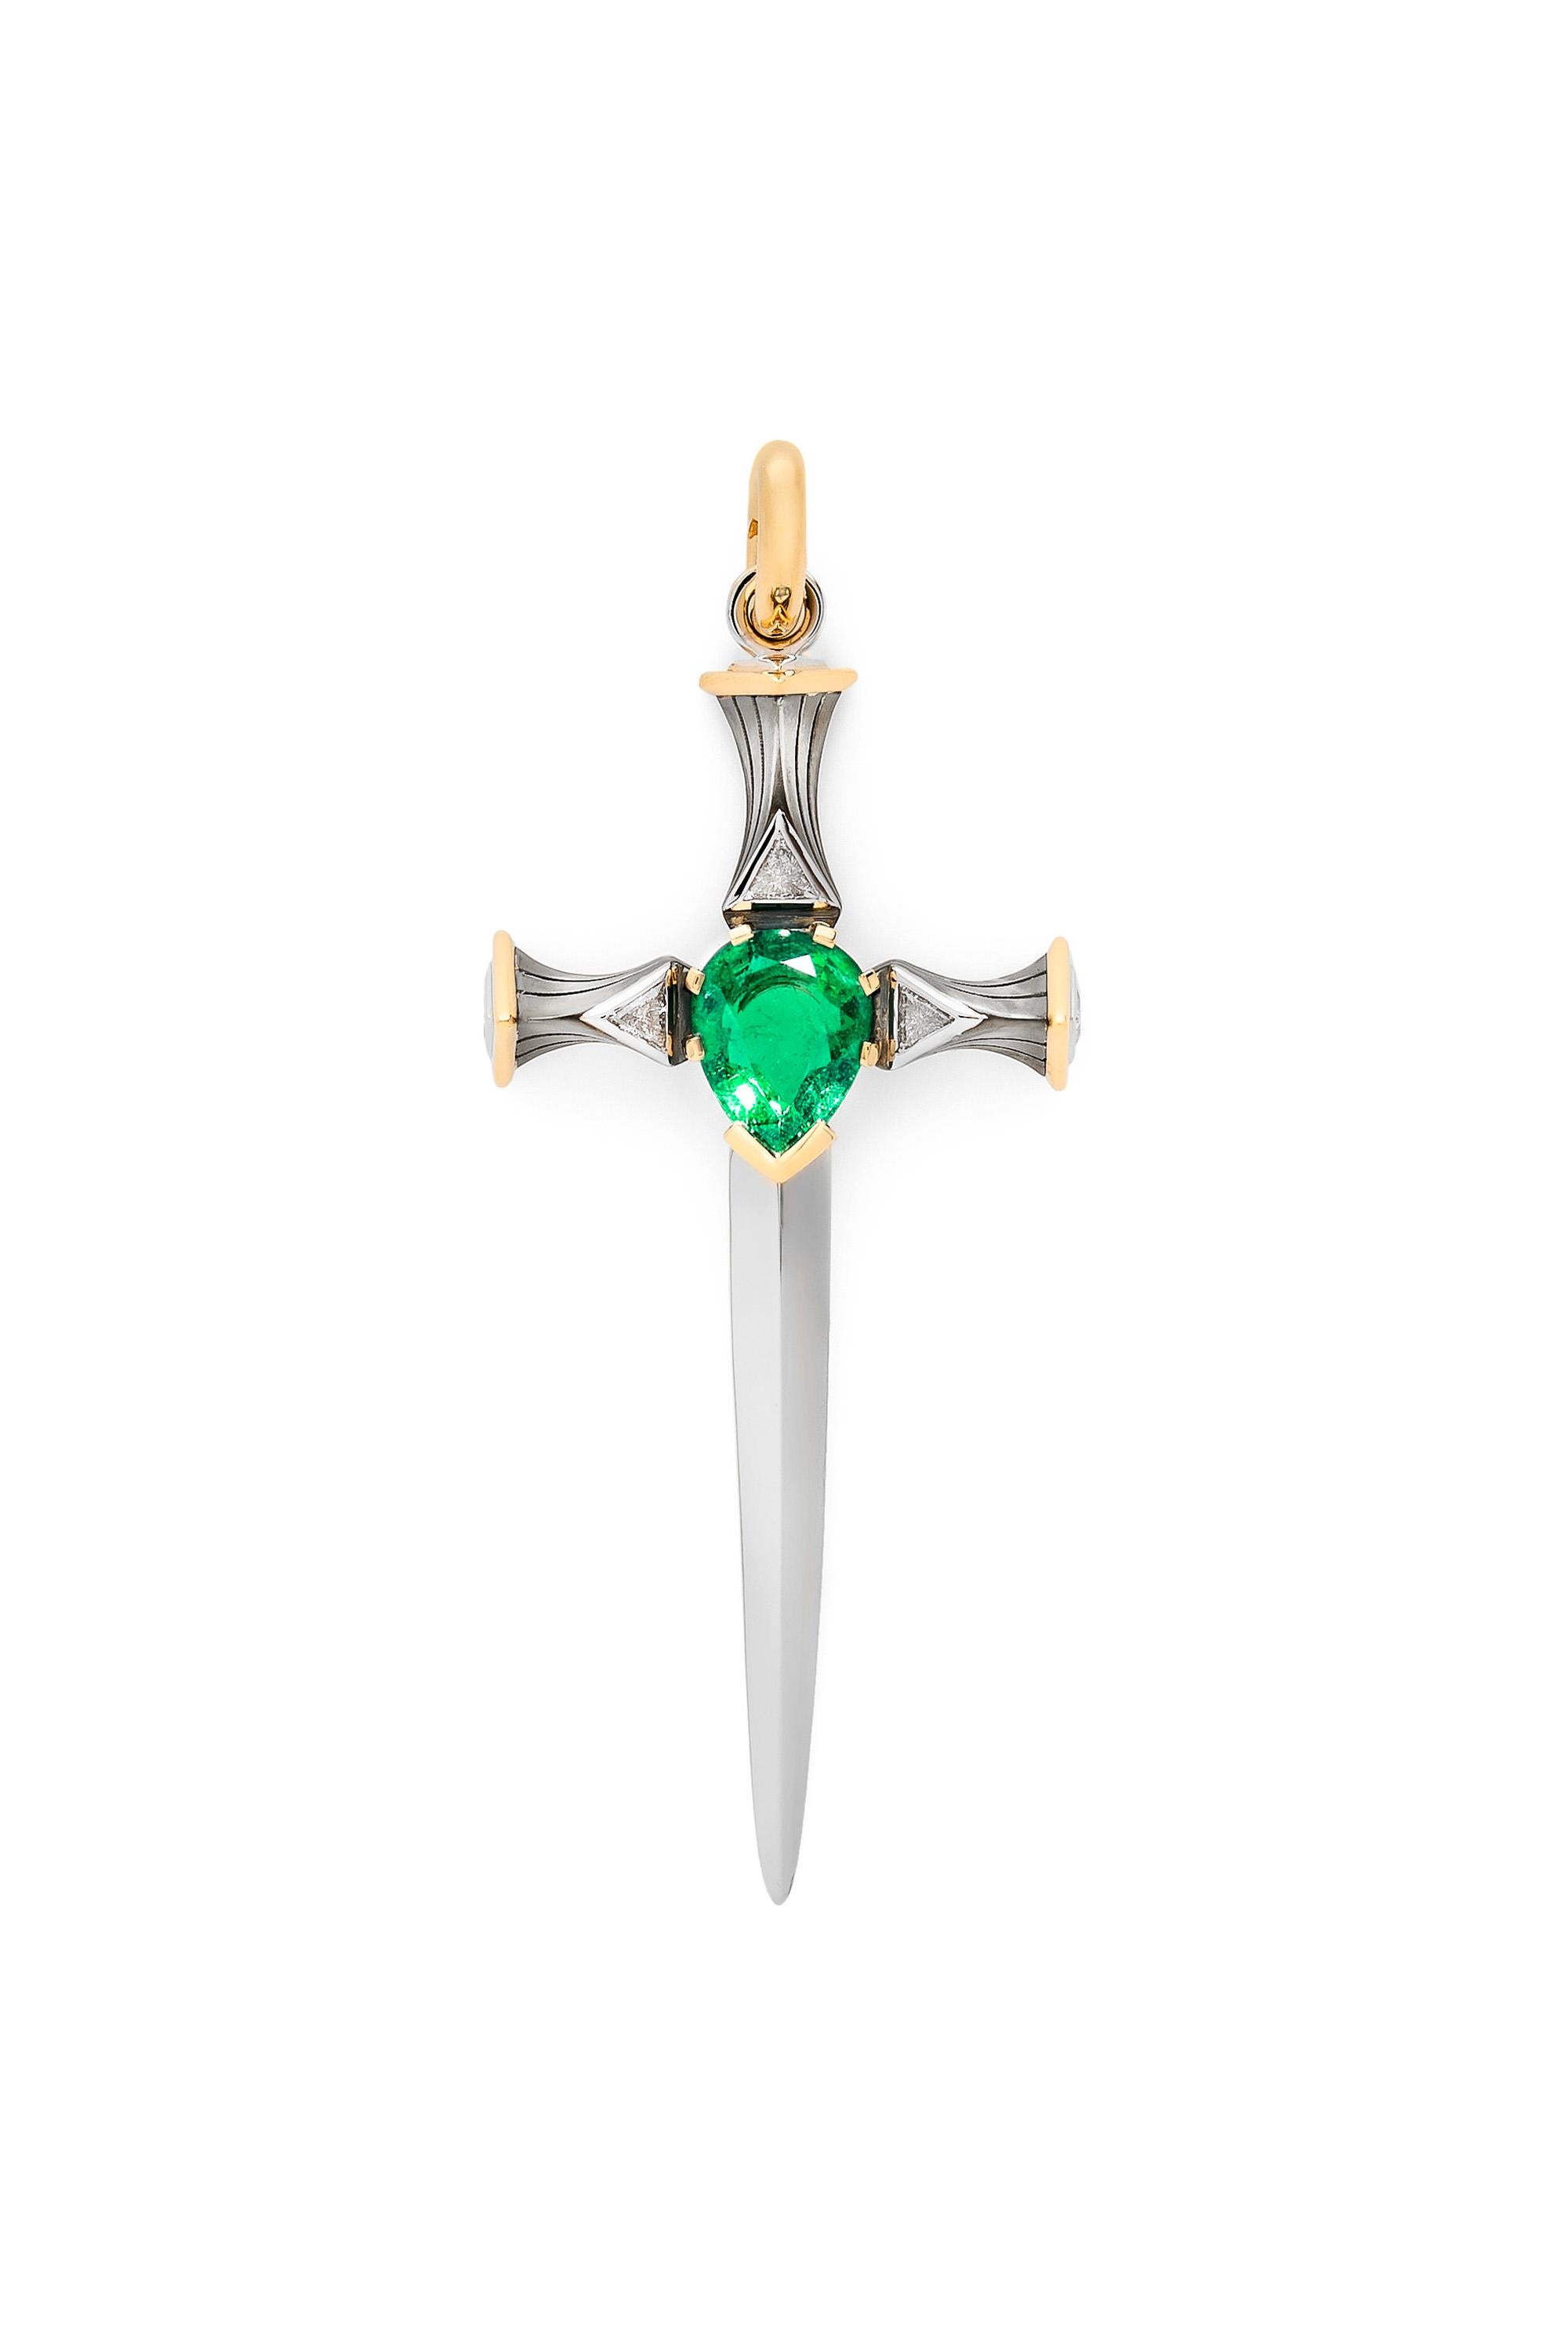 Neoclassical Emerald Épée Pendant in 18k Yellow Gold & Platinum by Elie Top For Sale